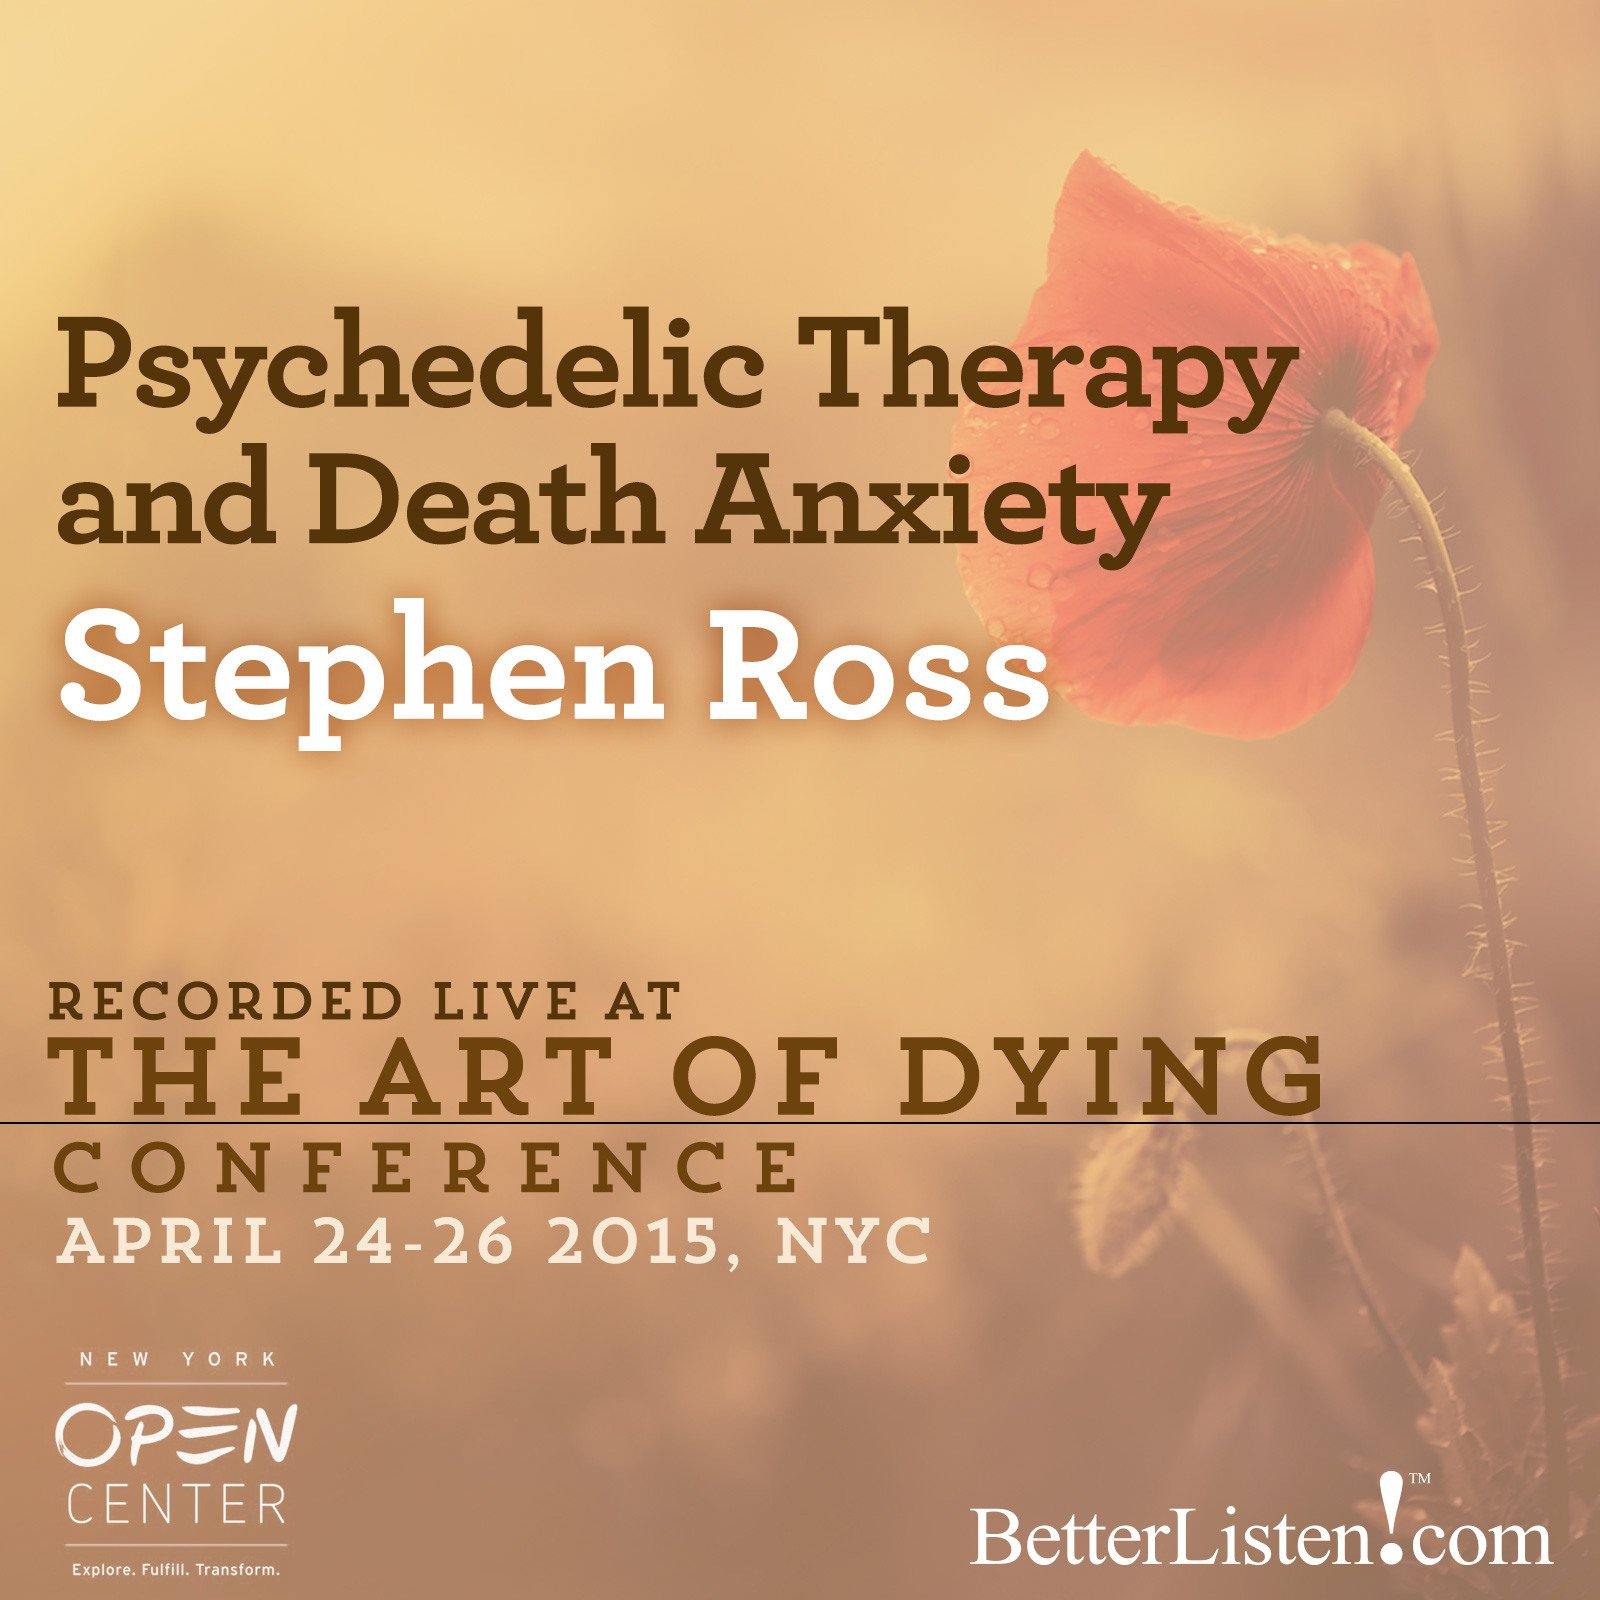 Psychedelic Therapy and Death Anxiety with Stephen Ross Audio Program BetterListen! - BetterListen!